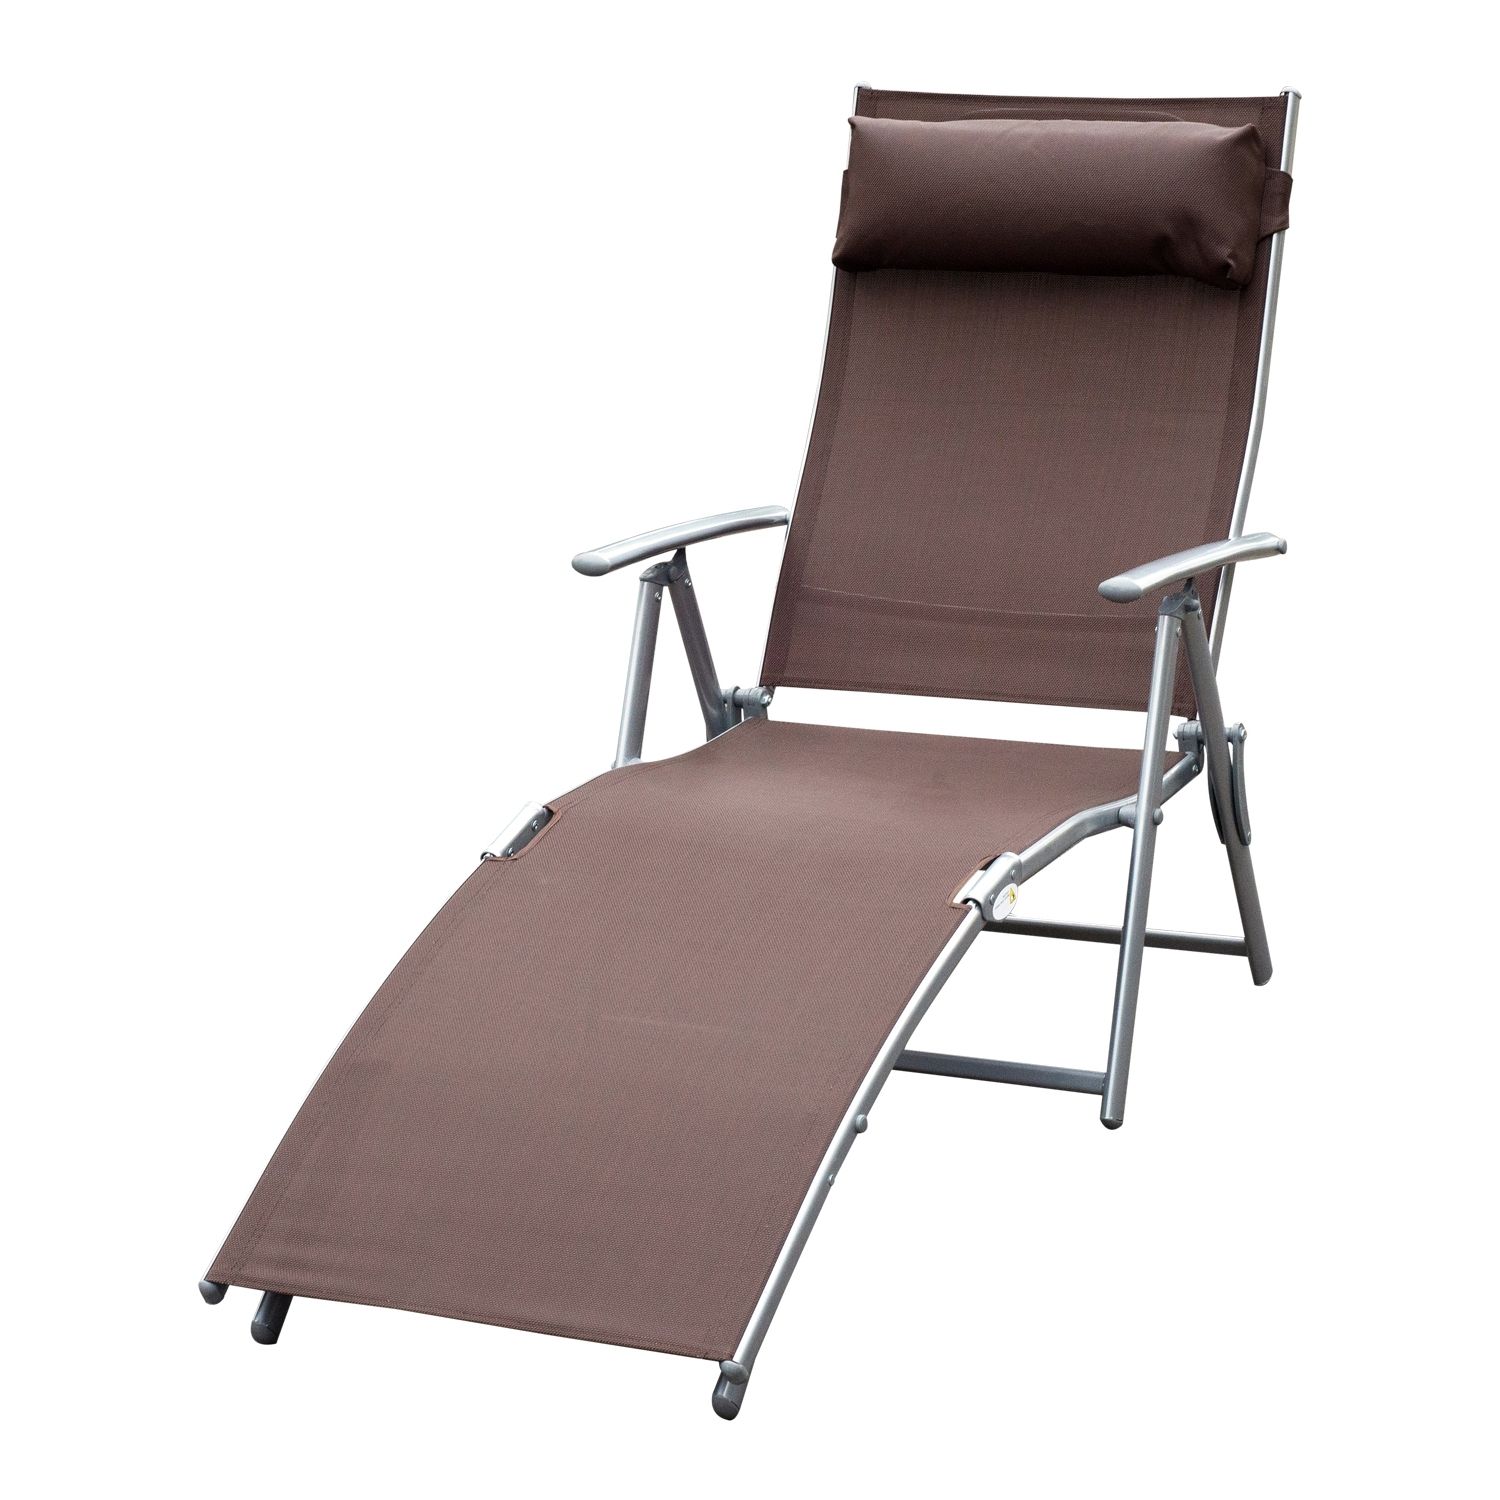 2018 Adjustable Pool Chaise Lounge Chair Recliners With Chaise Lounge Chair Folding Pool Beach Yard Adjustable Patio (View 15 of 15)